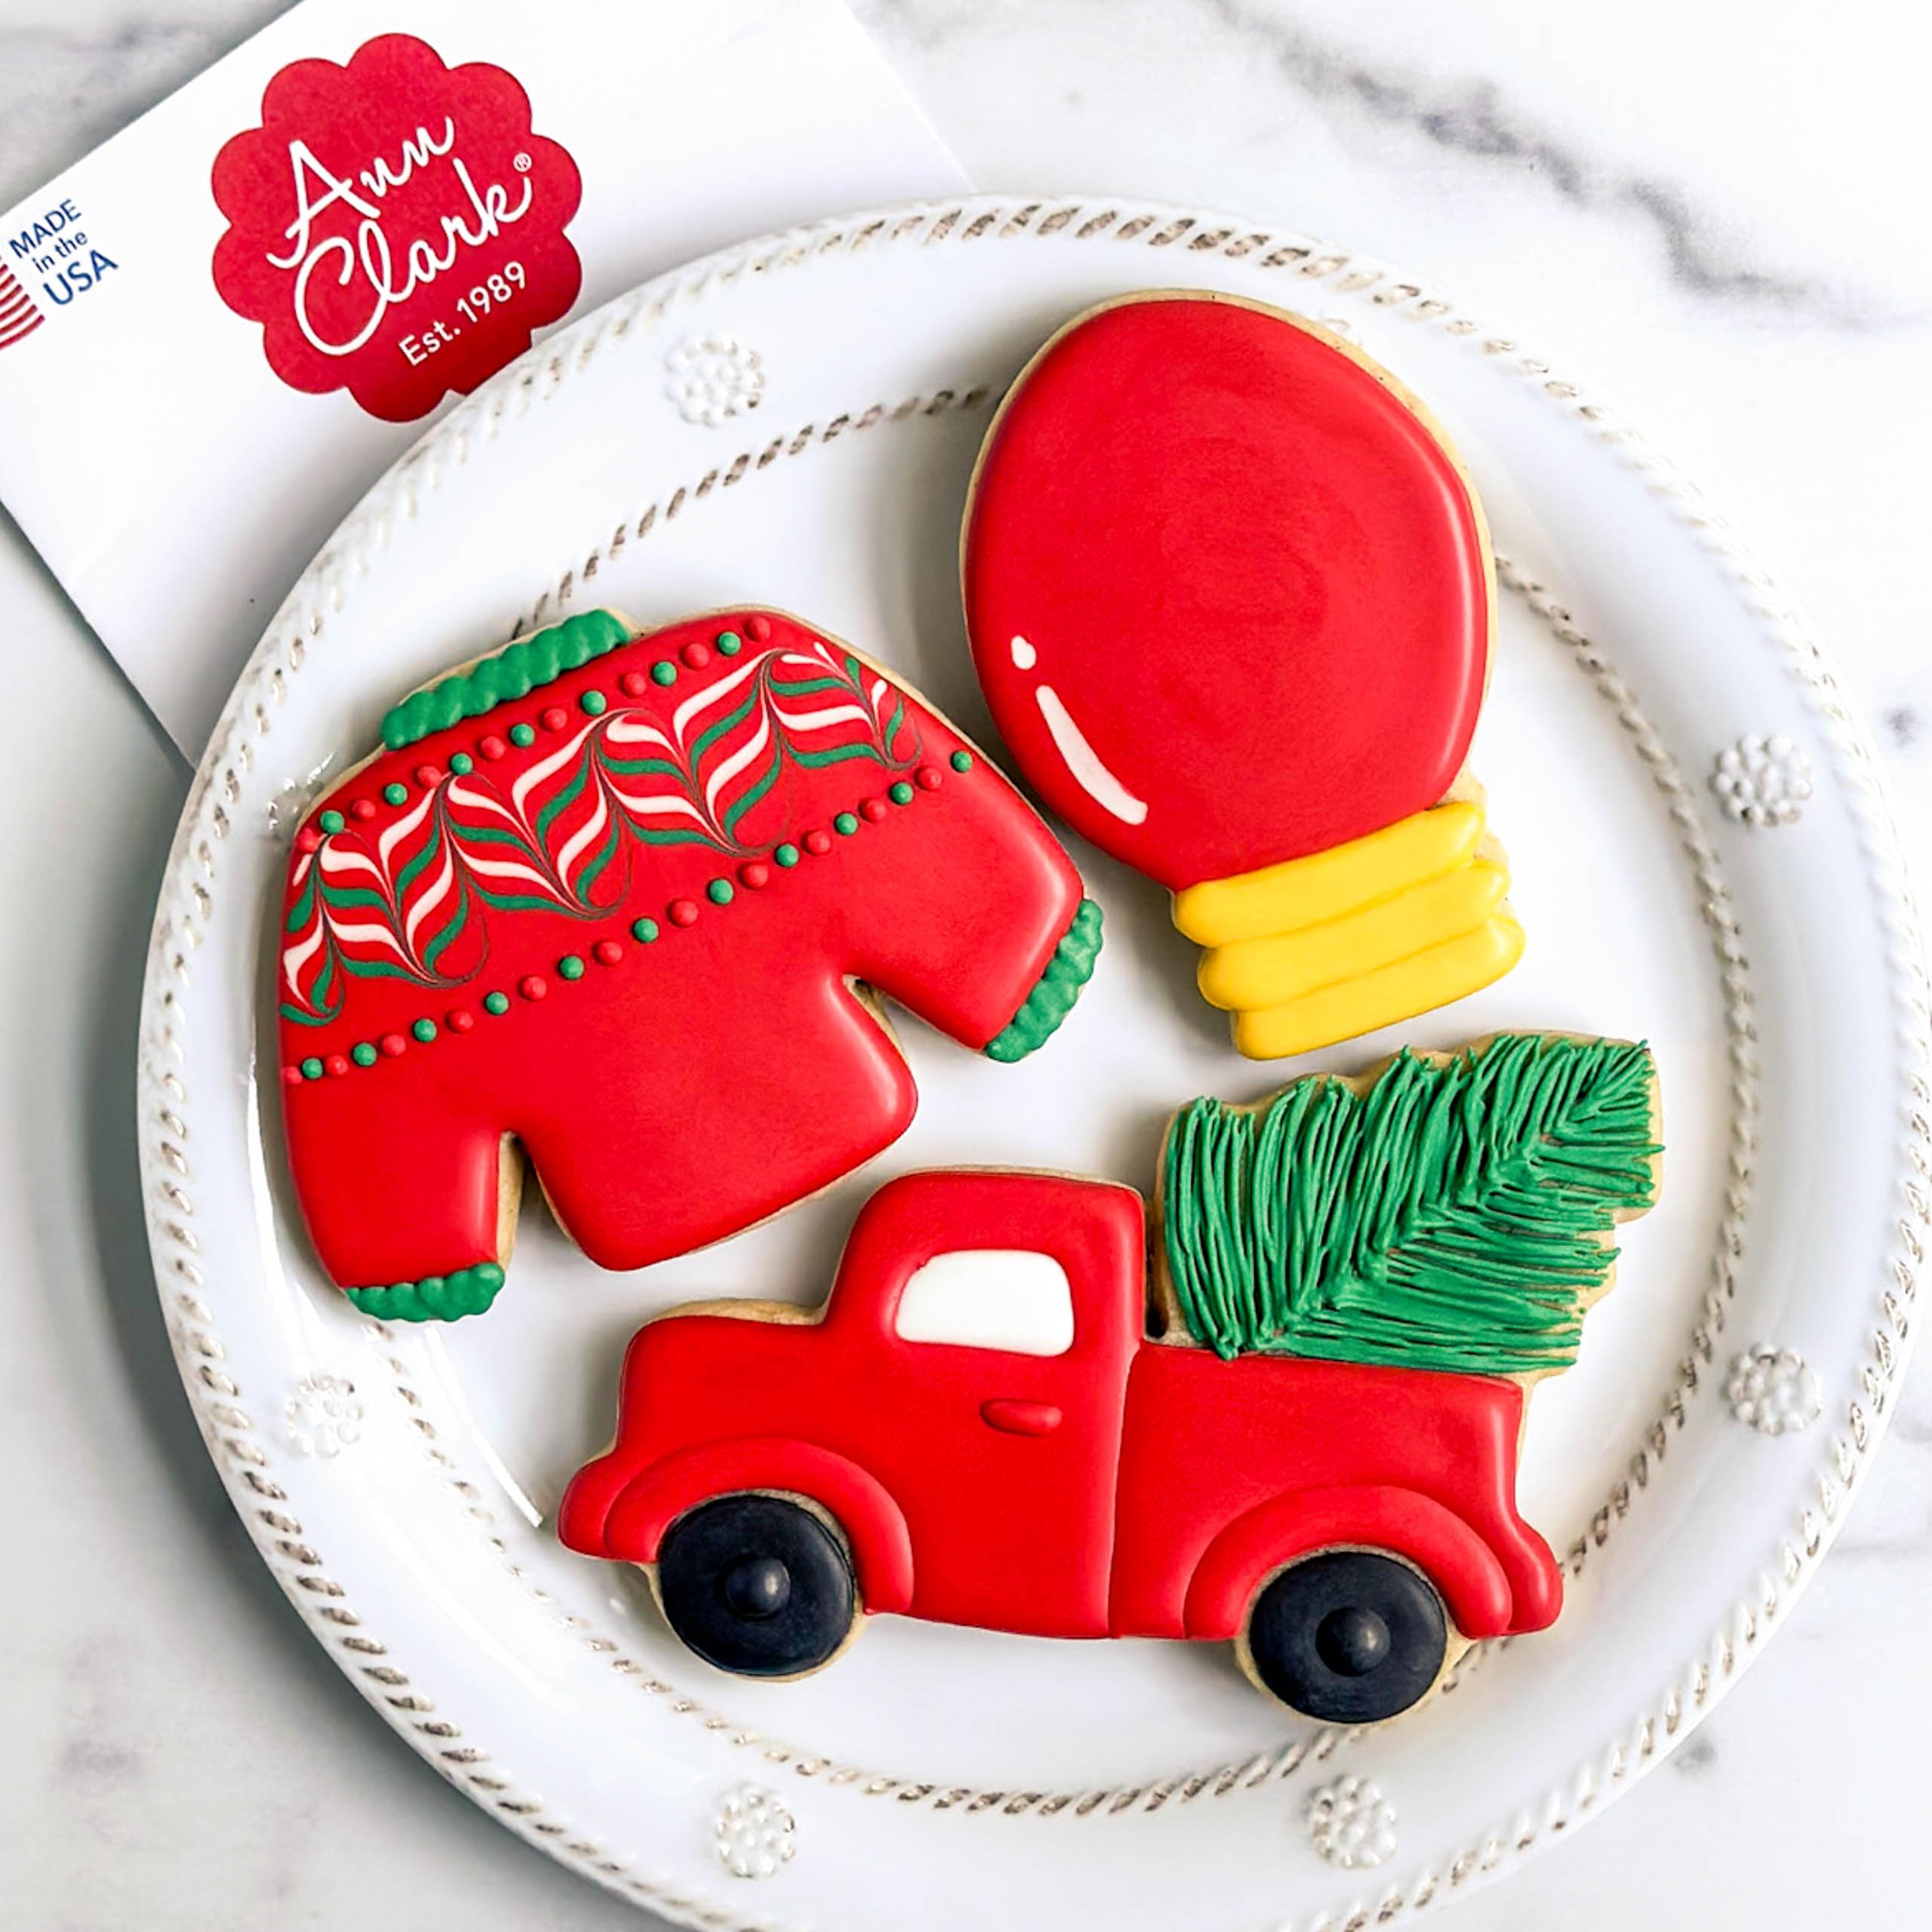 Christmas Trends Cookie Cutters 3-Pc. Set Made in the USA by Ann Clark, Vintage Truck with Tree, Lightbulb, Ugly Sweater